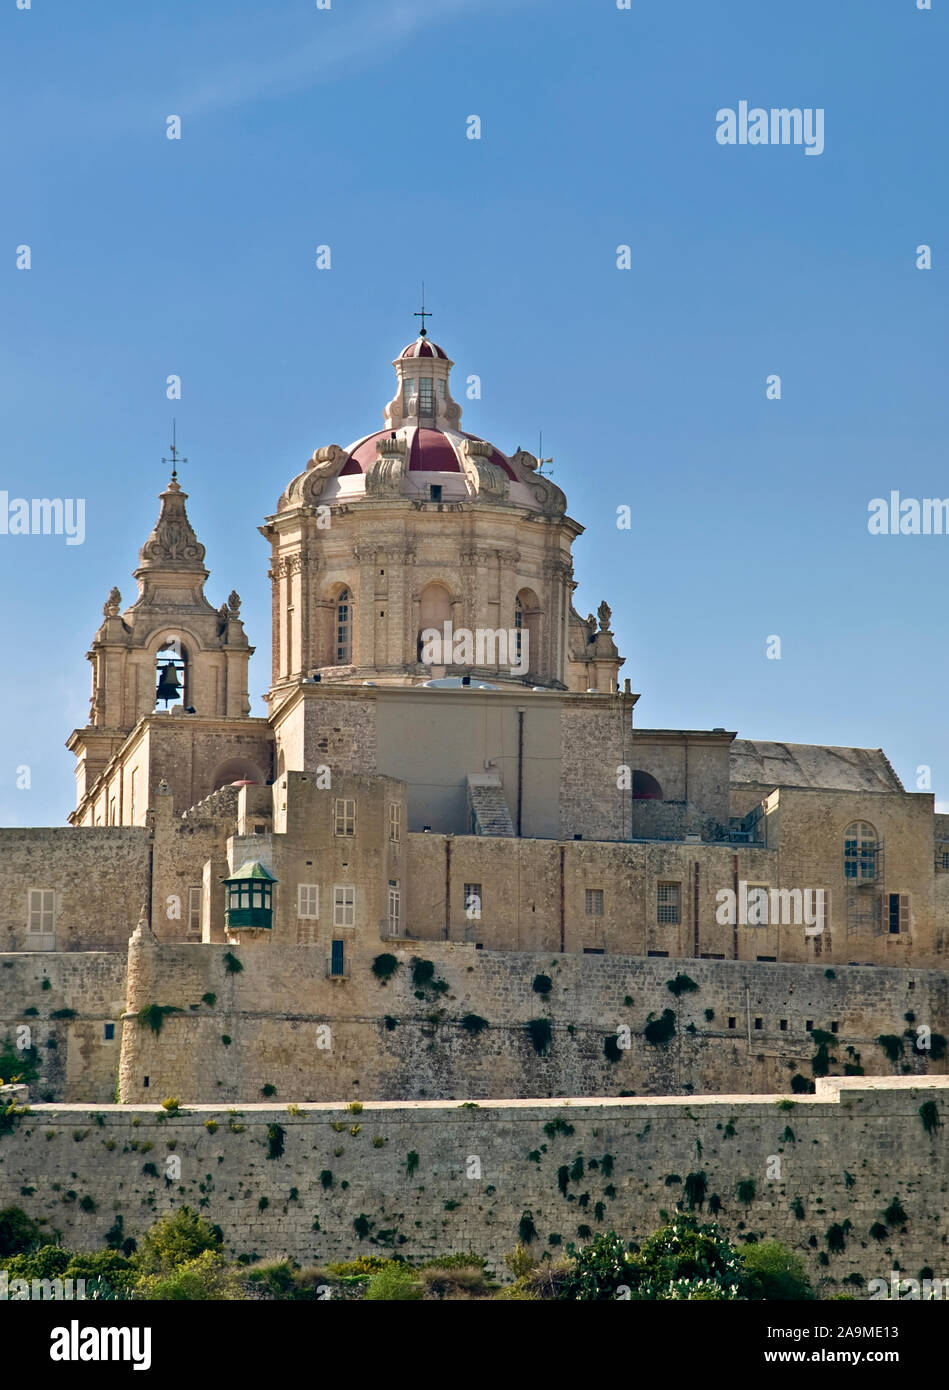 The dome of the medieval cathedral overlooking the bastions of the old city of Malta, Mdina. Stock Photo